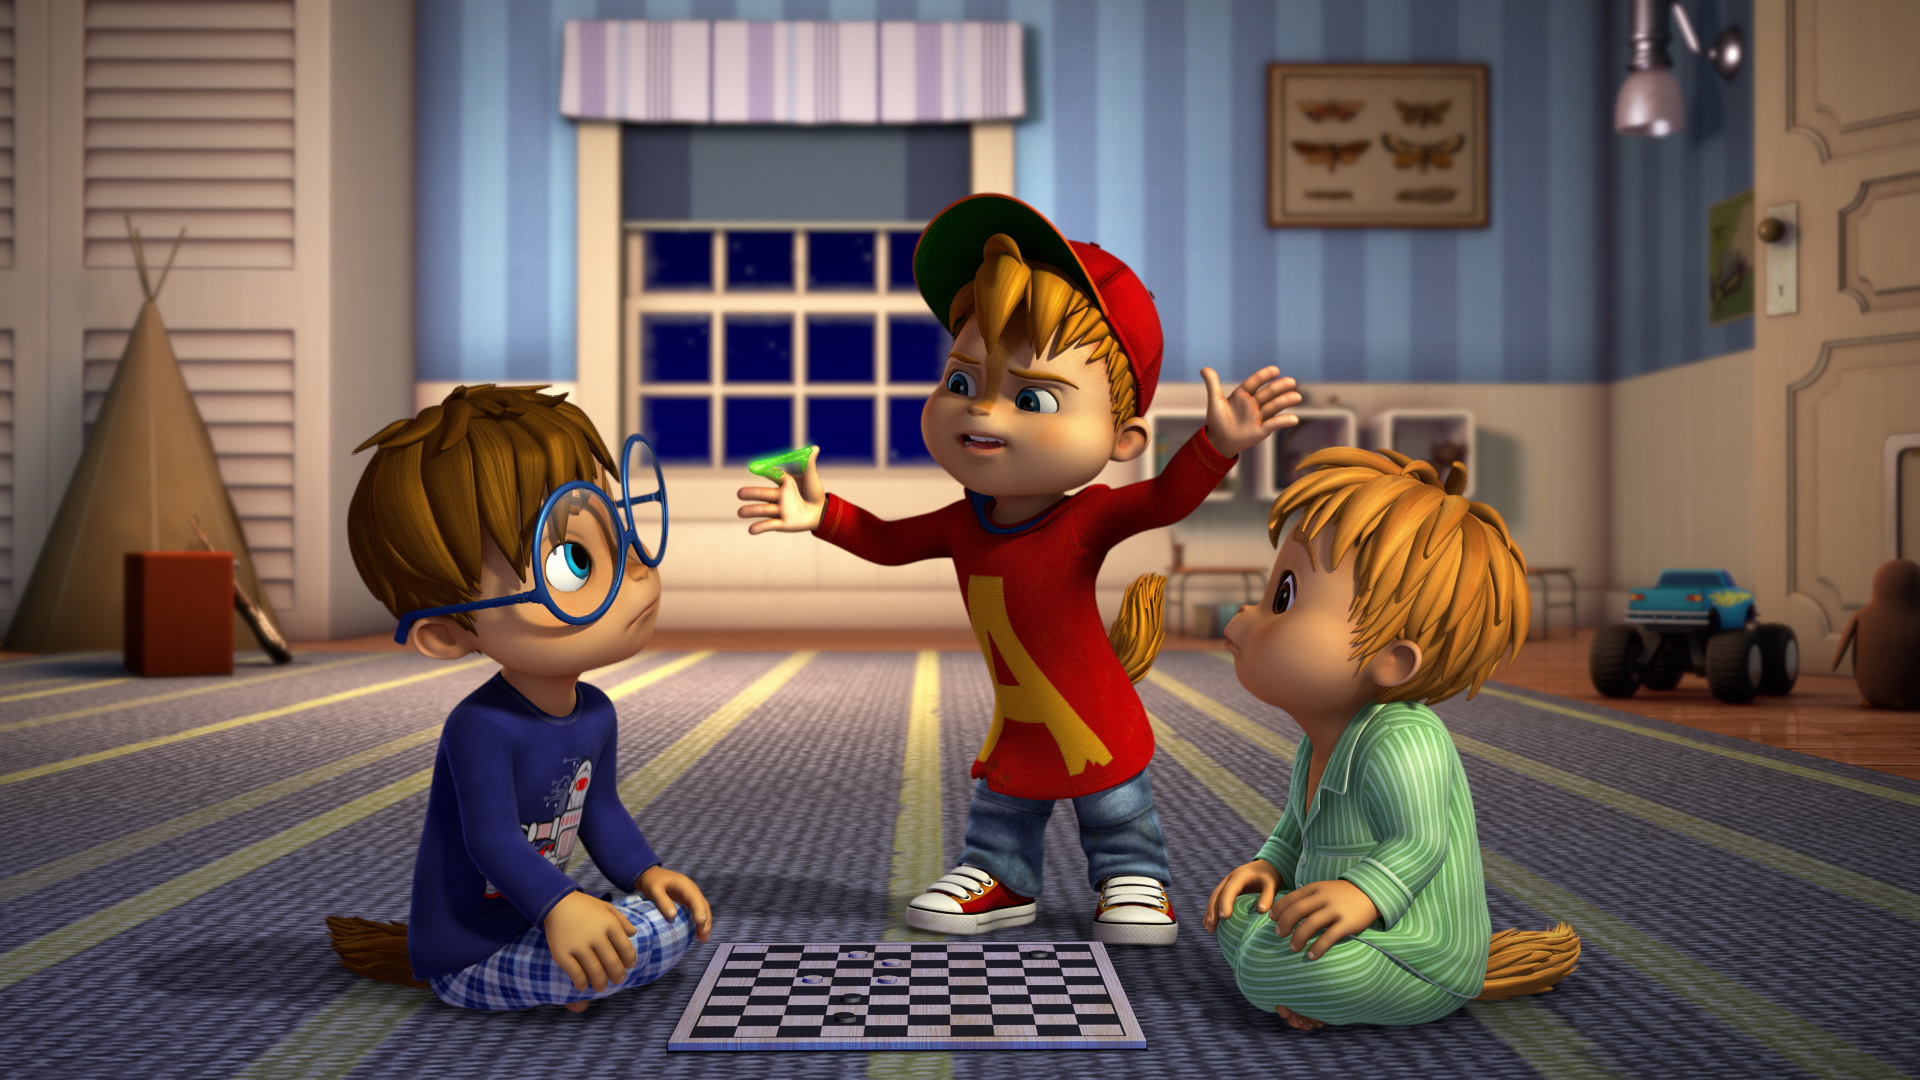 Watch ALVINNN!!! and The Chipmunks Season 1 Episode 2: A is for Alien - What Channel Is Alvin And The Chipmunks On